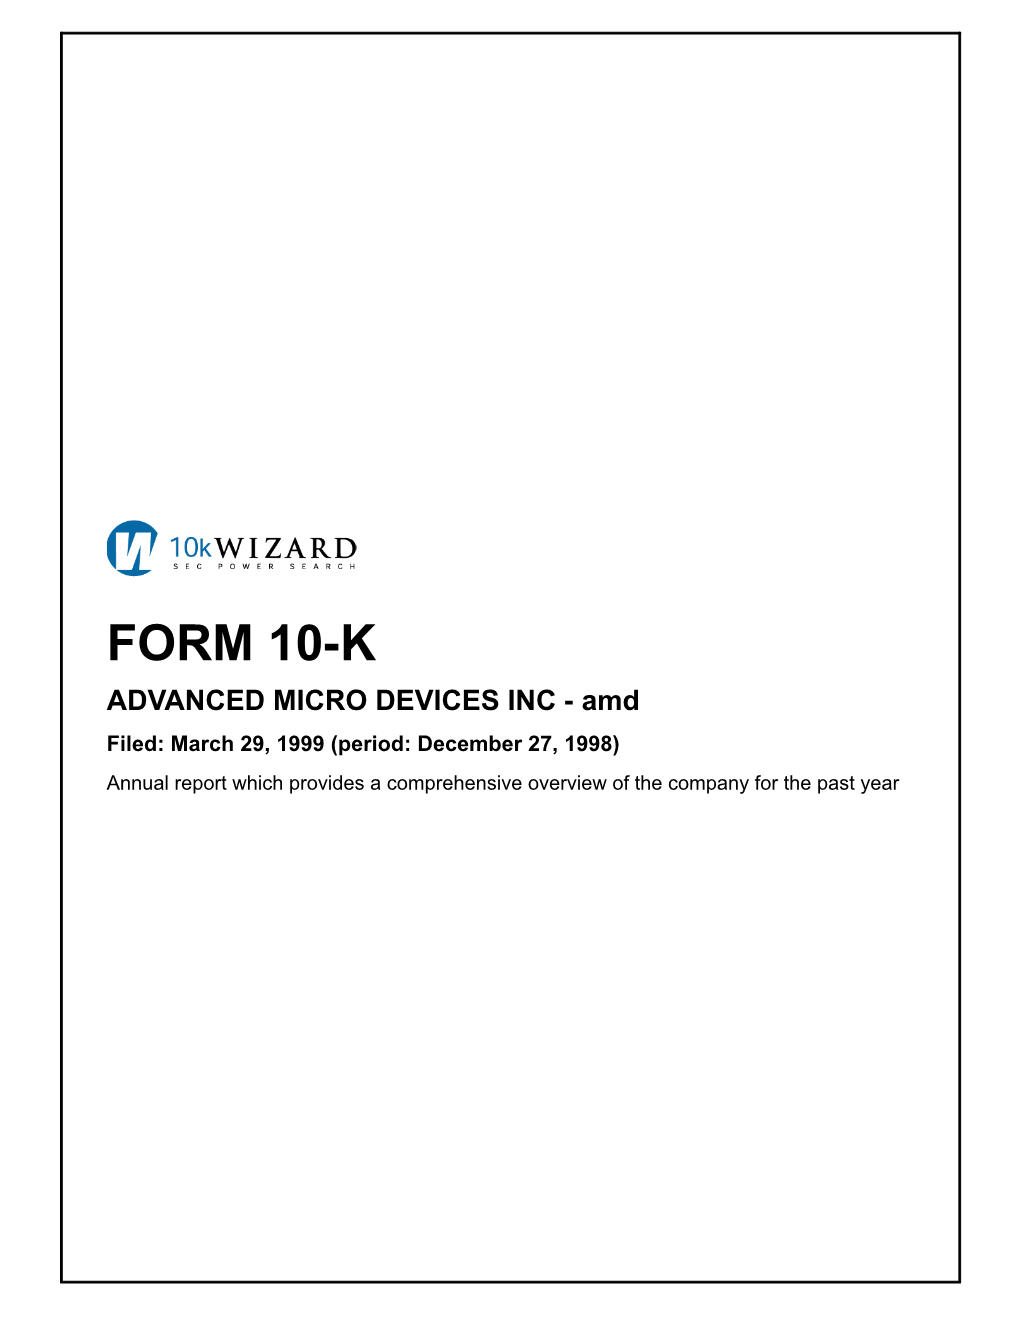 Form 10-K Advanced Micro Devices